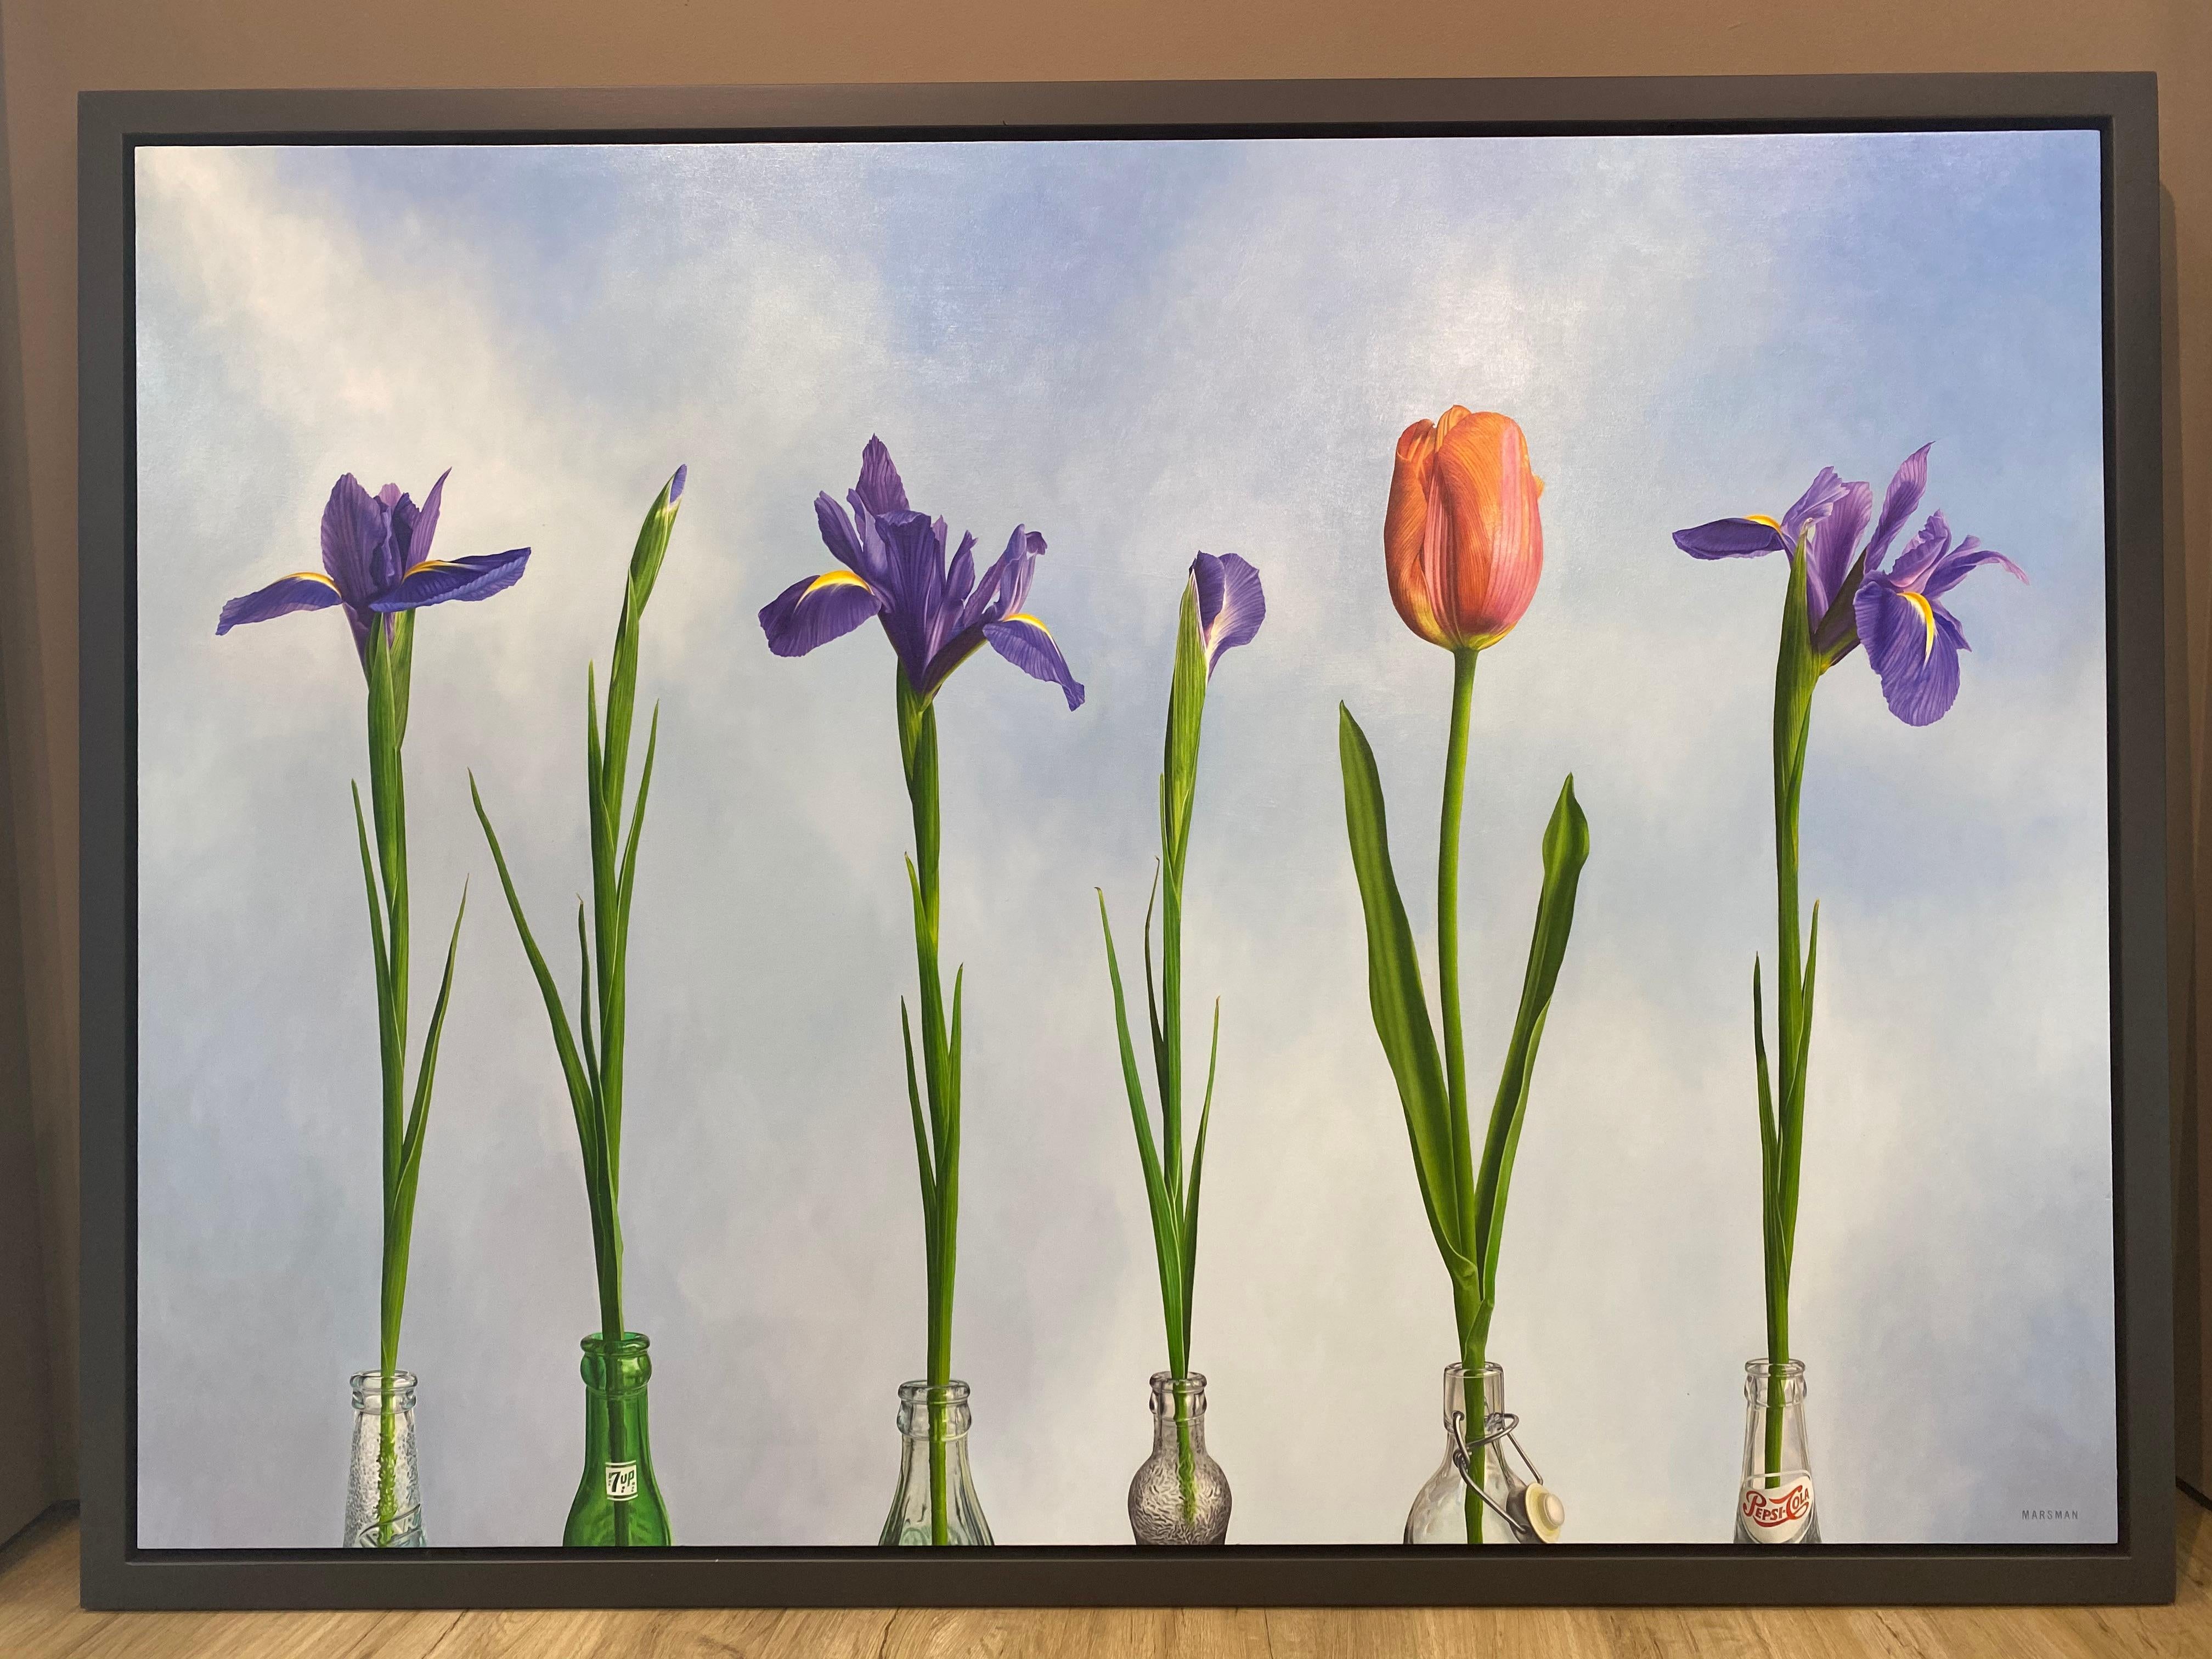 5 Irises and 1 Tulip- 21st Century Oilpainting of flowers in bright colors - Painting by JP Marsman